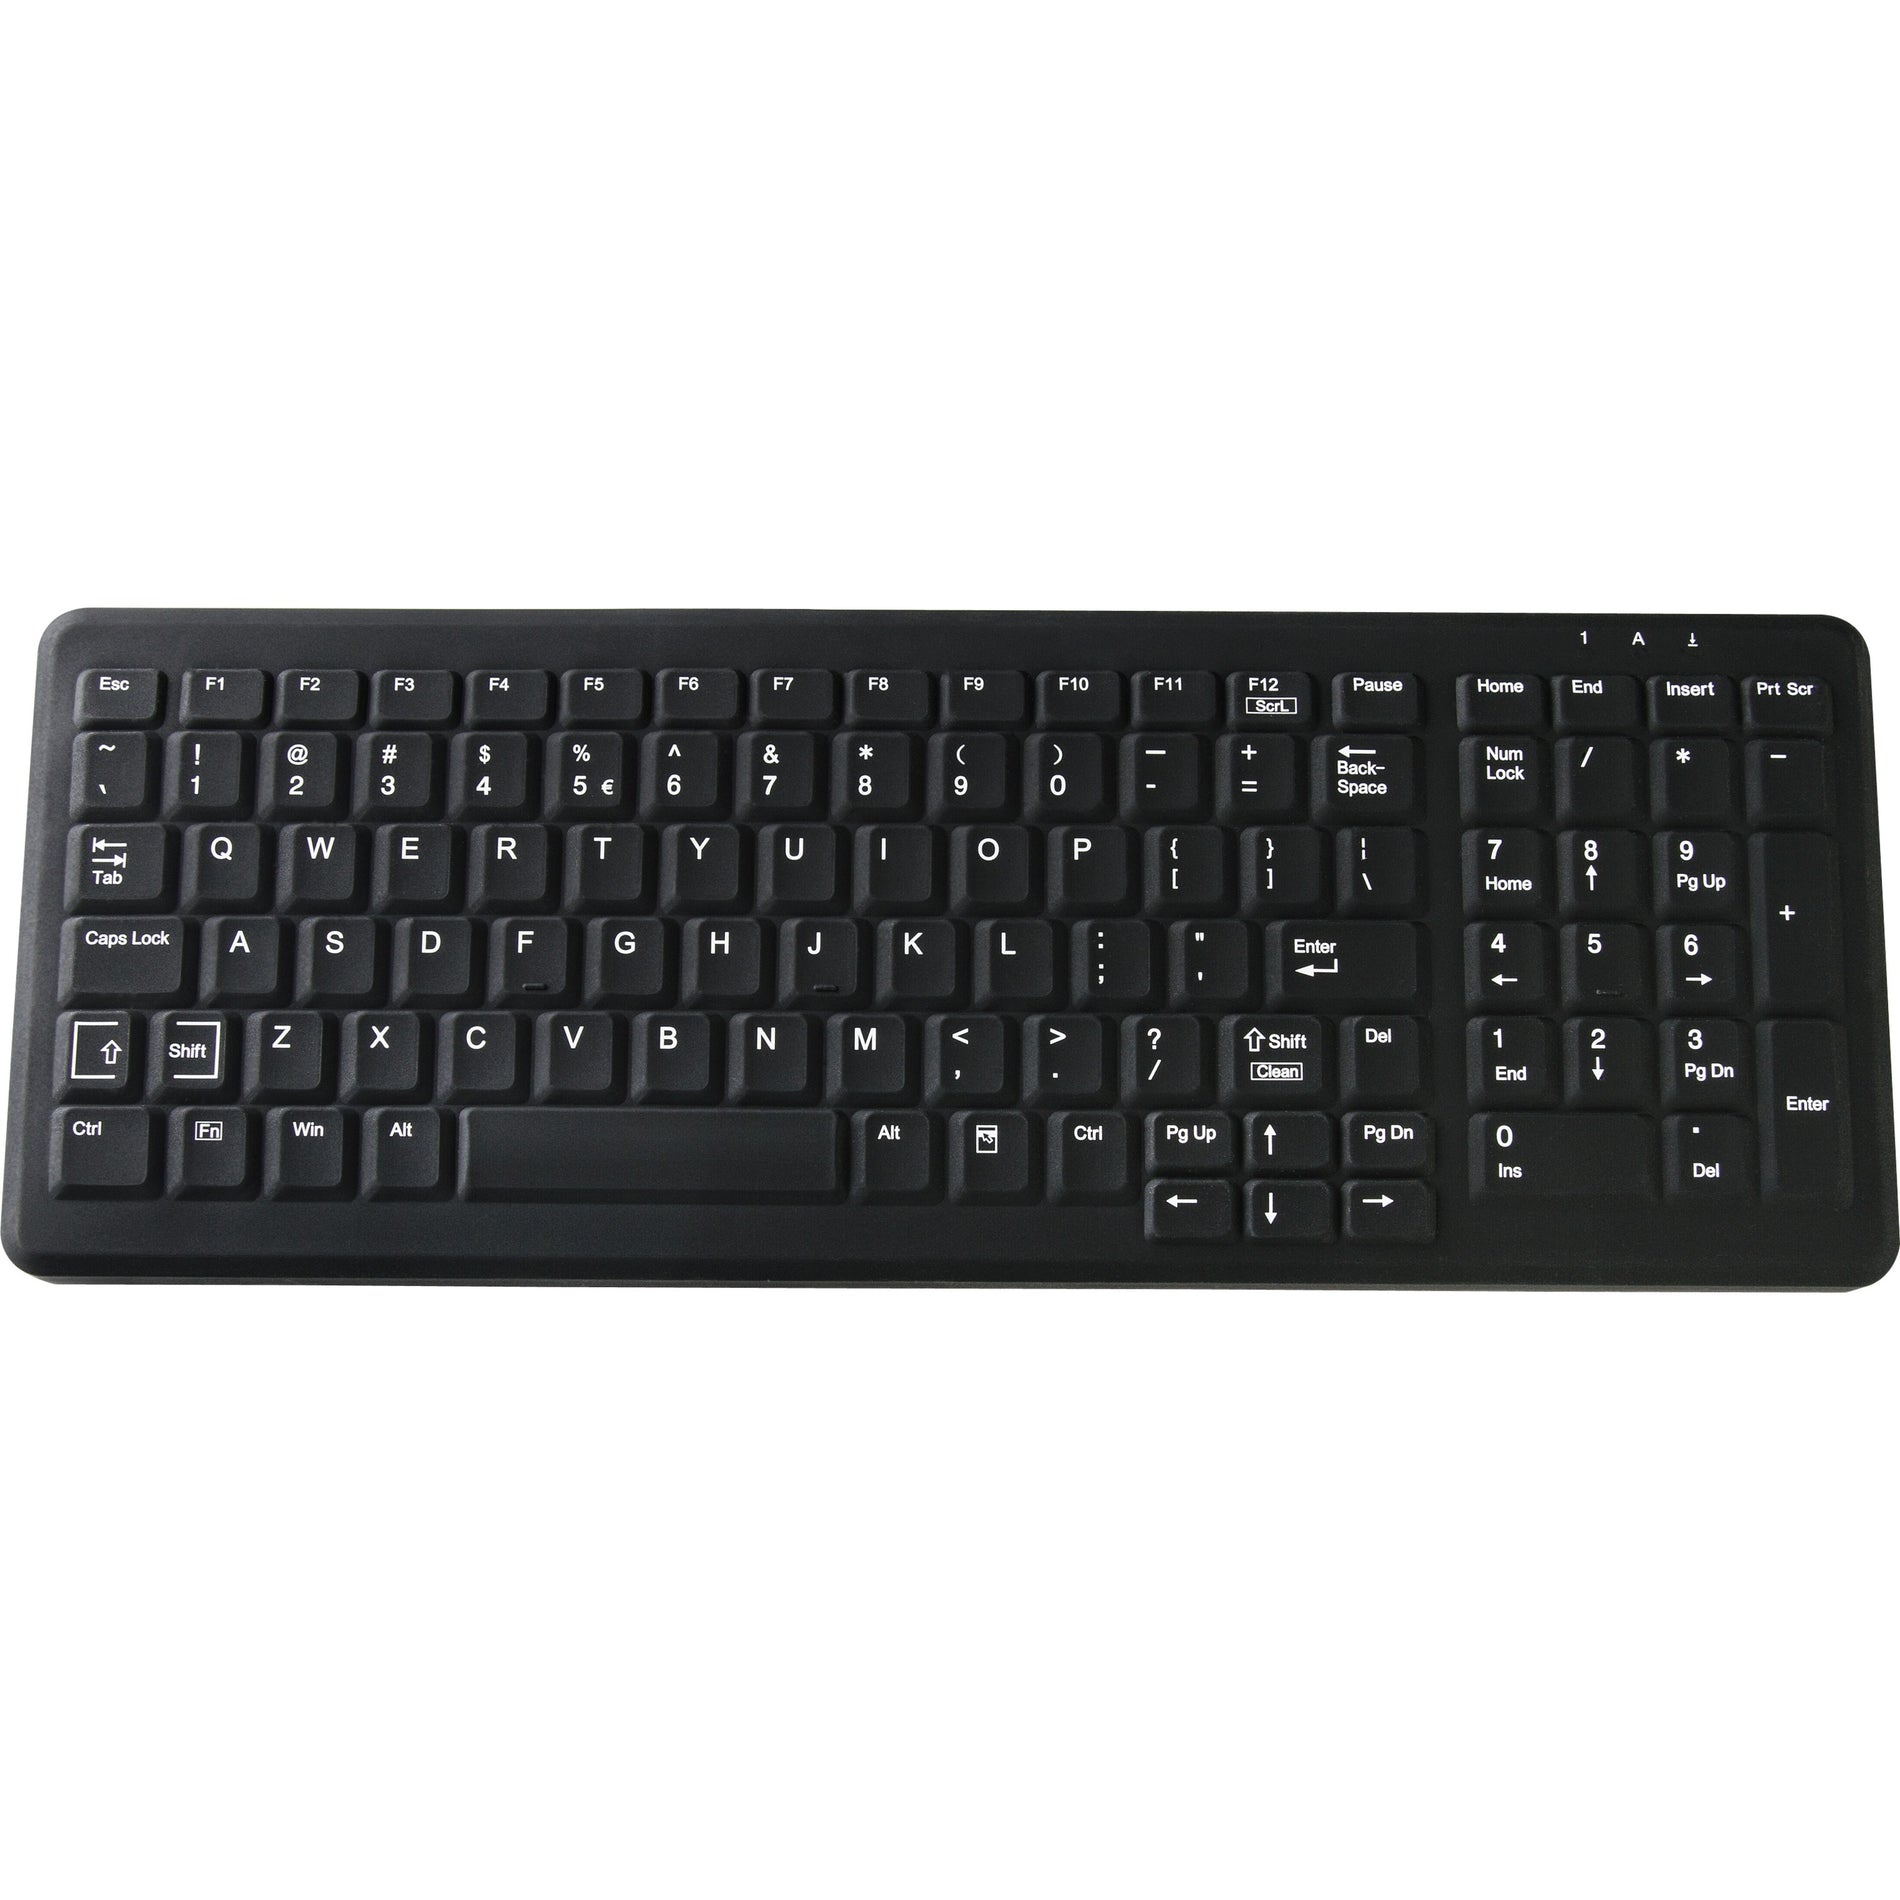 TG3 KBA-CK103S-BNUW-US CK103S Keyboard, QWERTY Layout, USB Cable Connectivity, Black